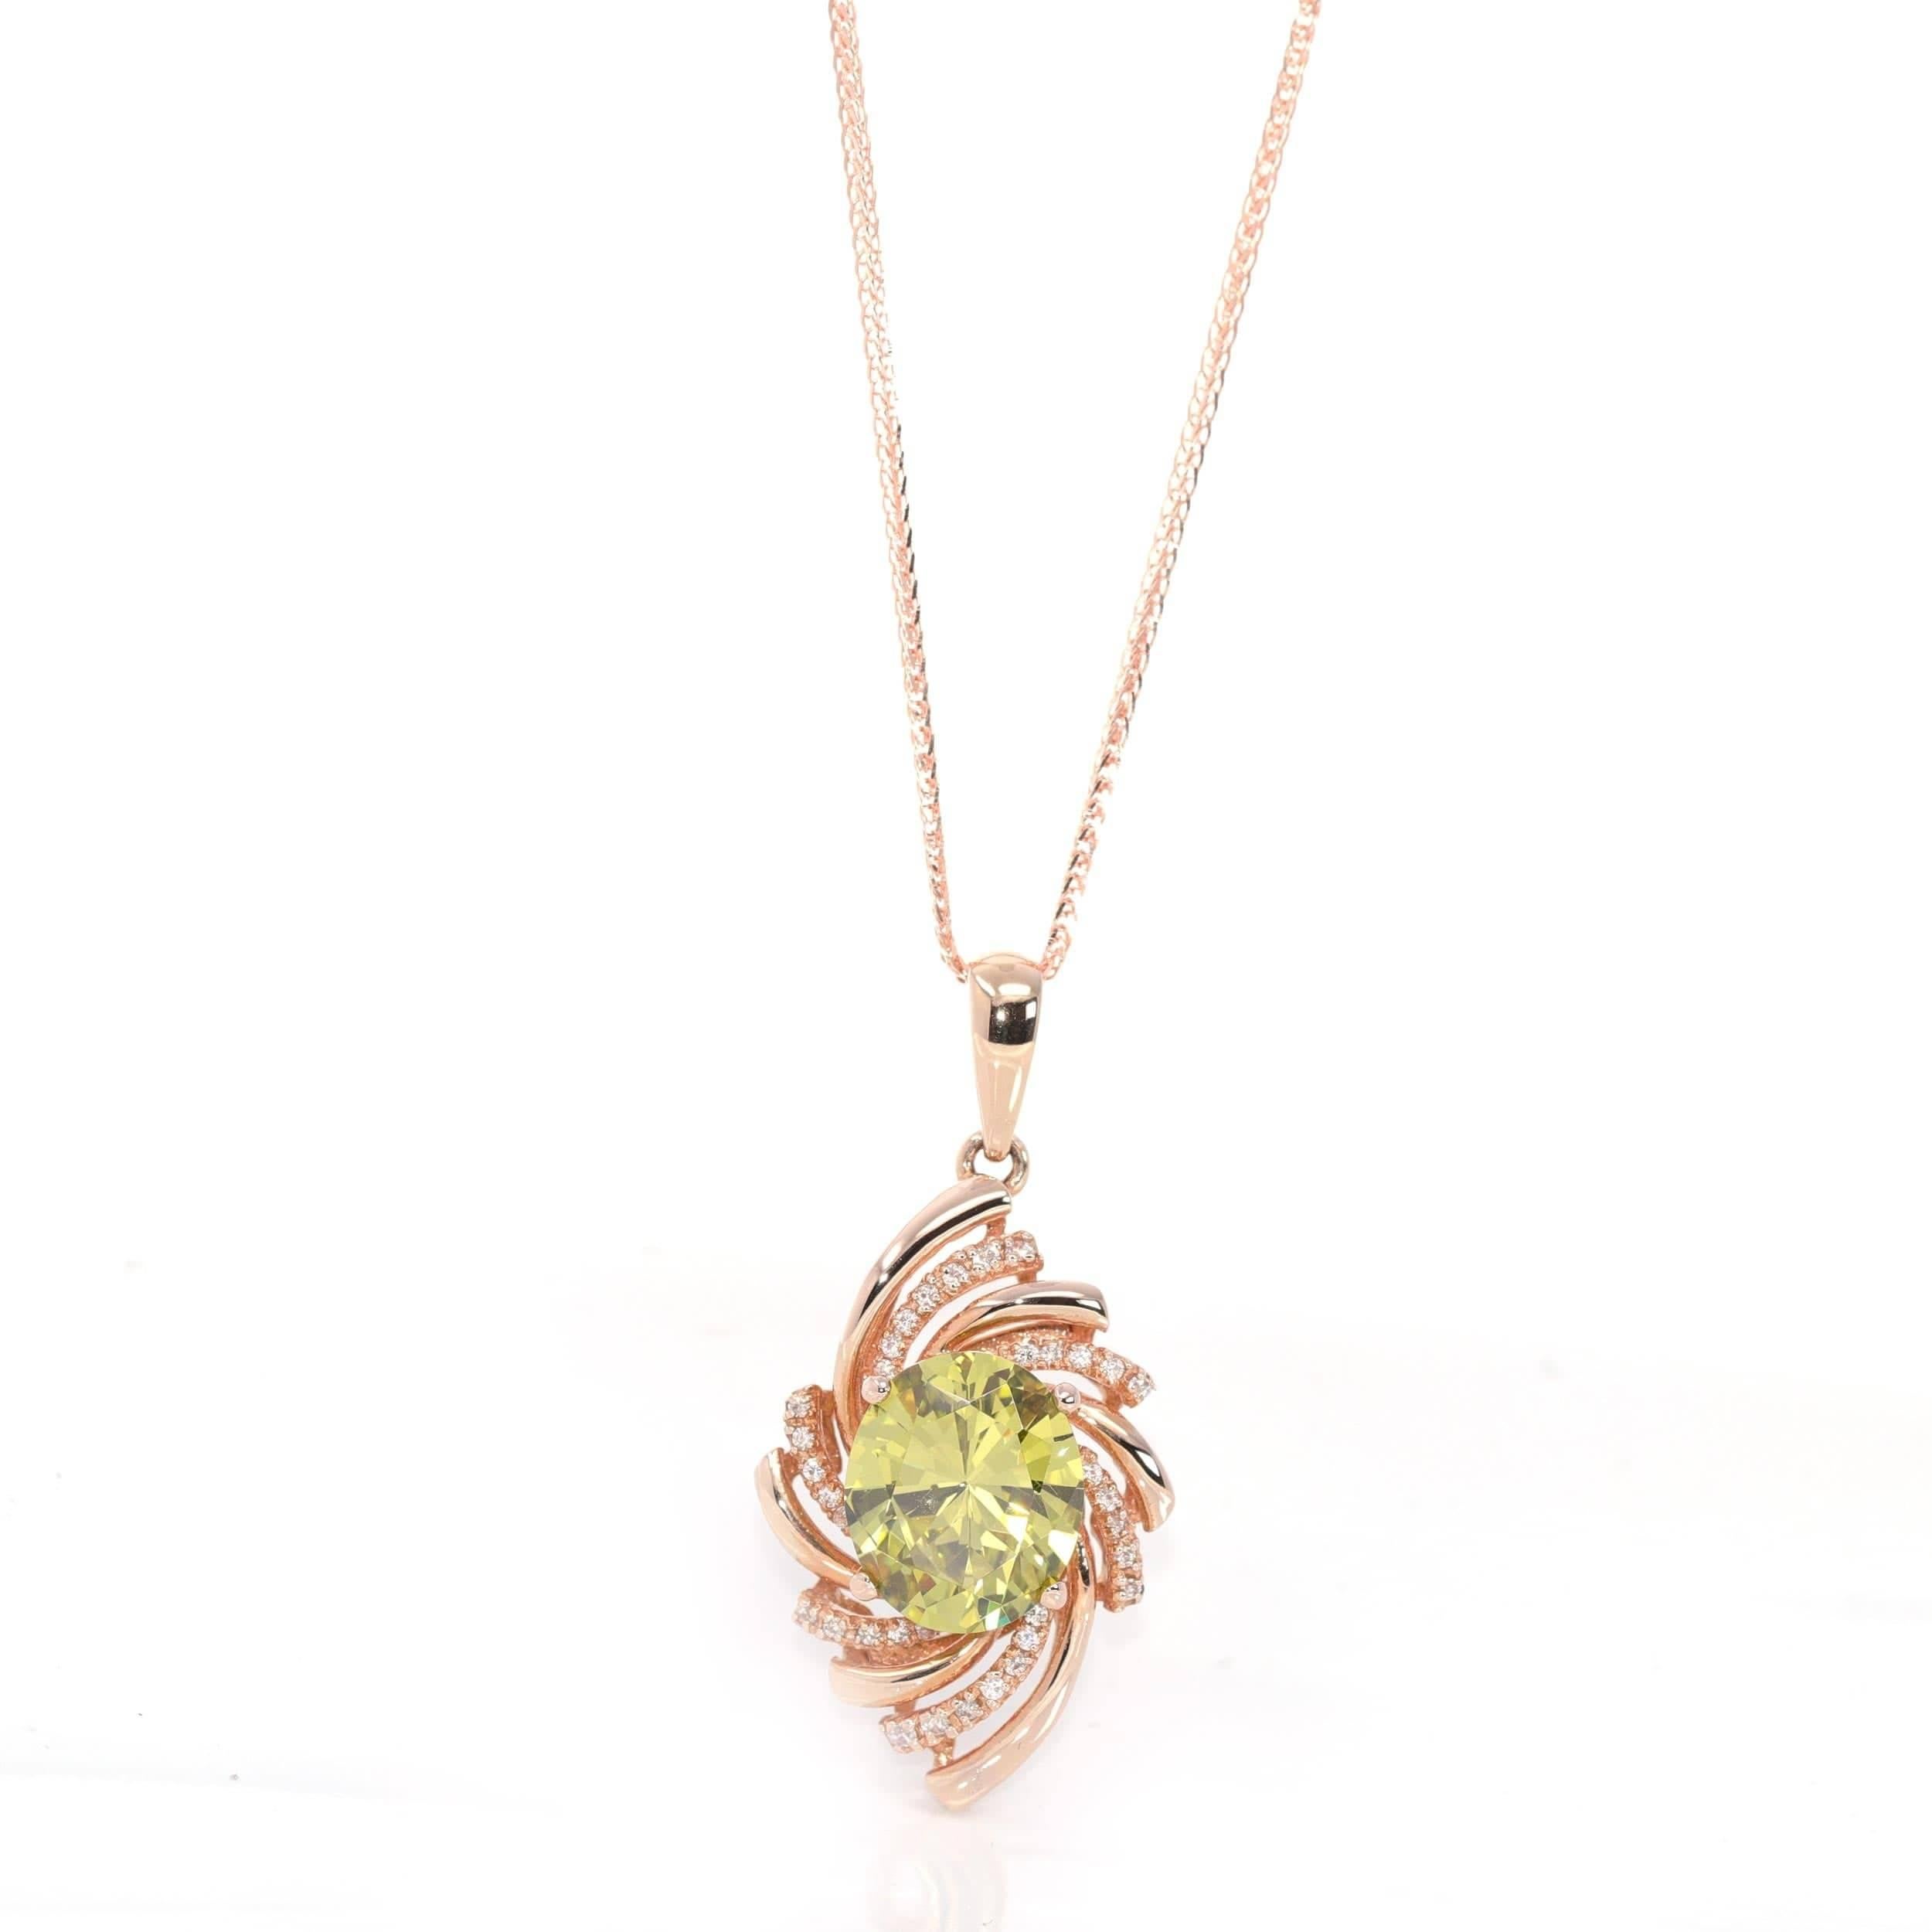 * INTRODUCTION----- This pendant is made with high-quality genuine AAA nice purple amethyst & CZ. It looks so royal and exquisite. The luxury light green color stands out like no other. And the whole peridot is so vibrant. The style is simple and